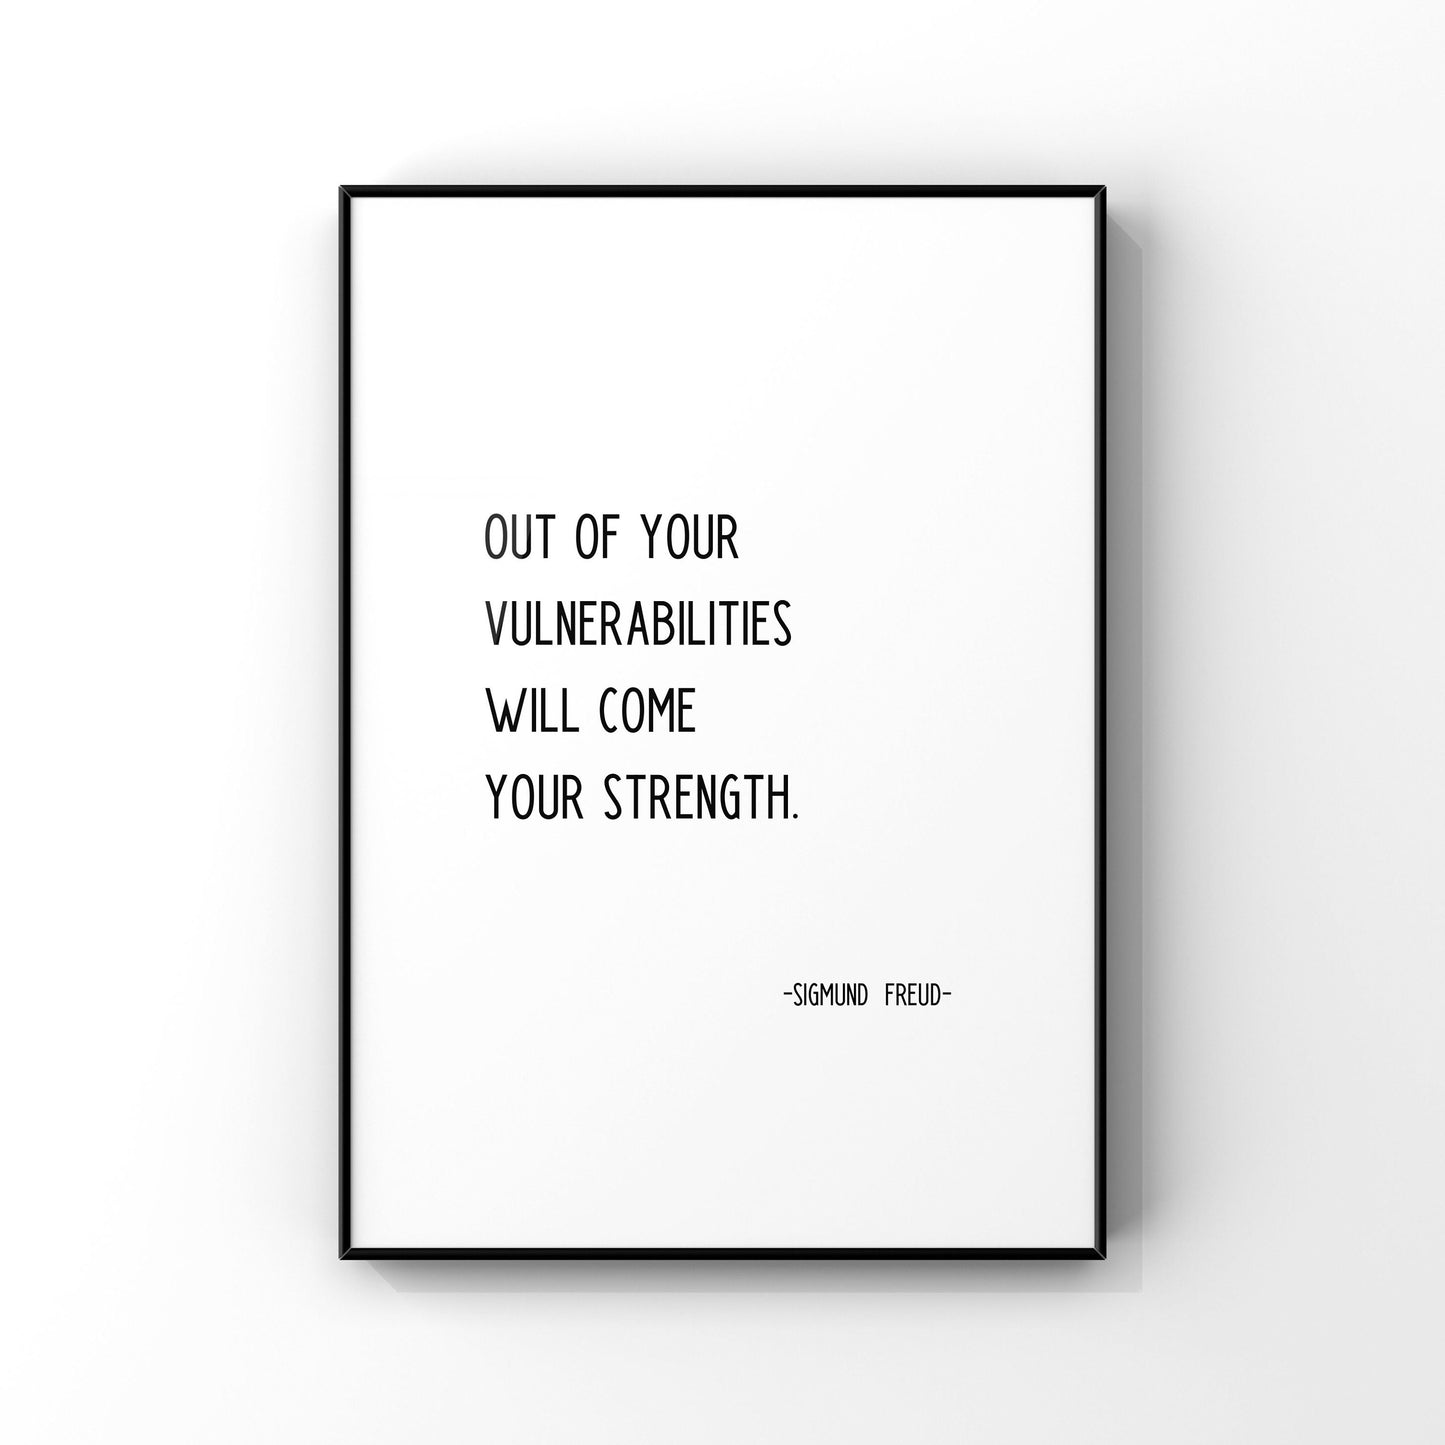 Out of your vulnerabilities will come your strength, Sigmund Freud quote, Inspirational quote print,Motivational saying,Encouragement gift